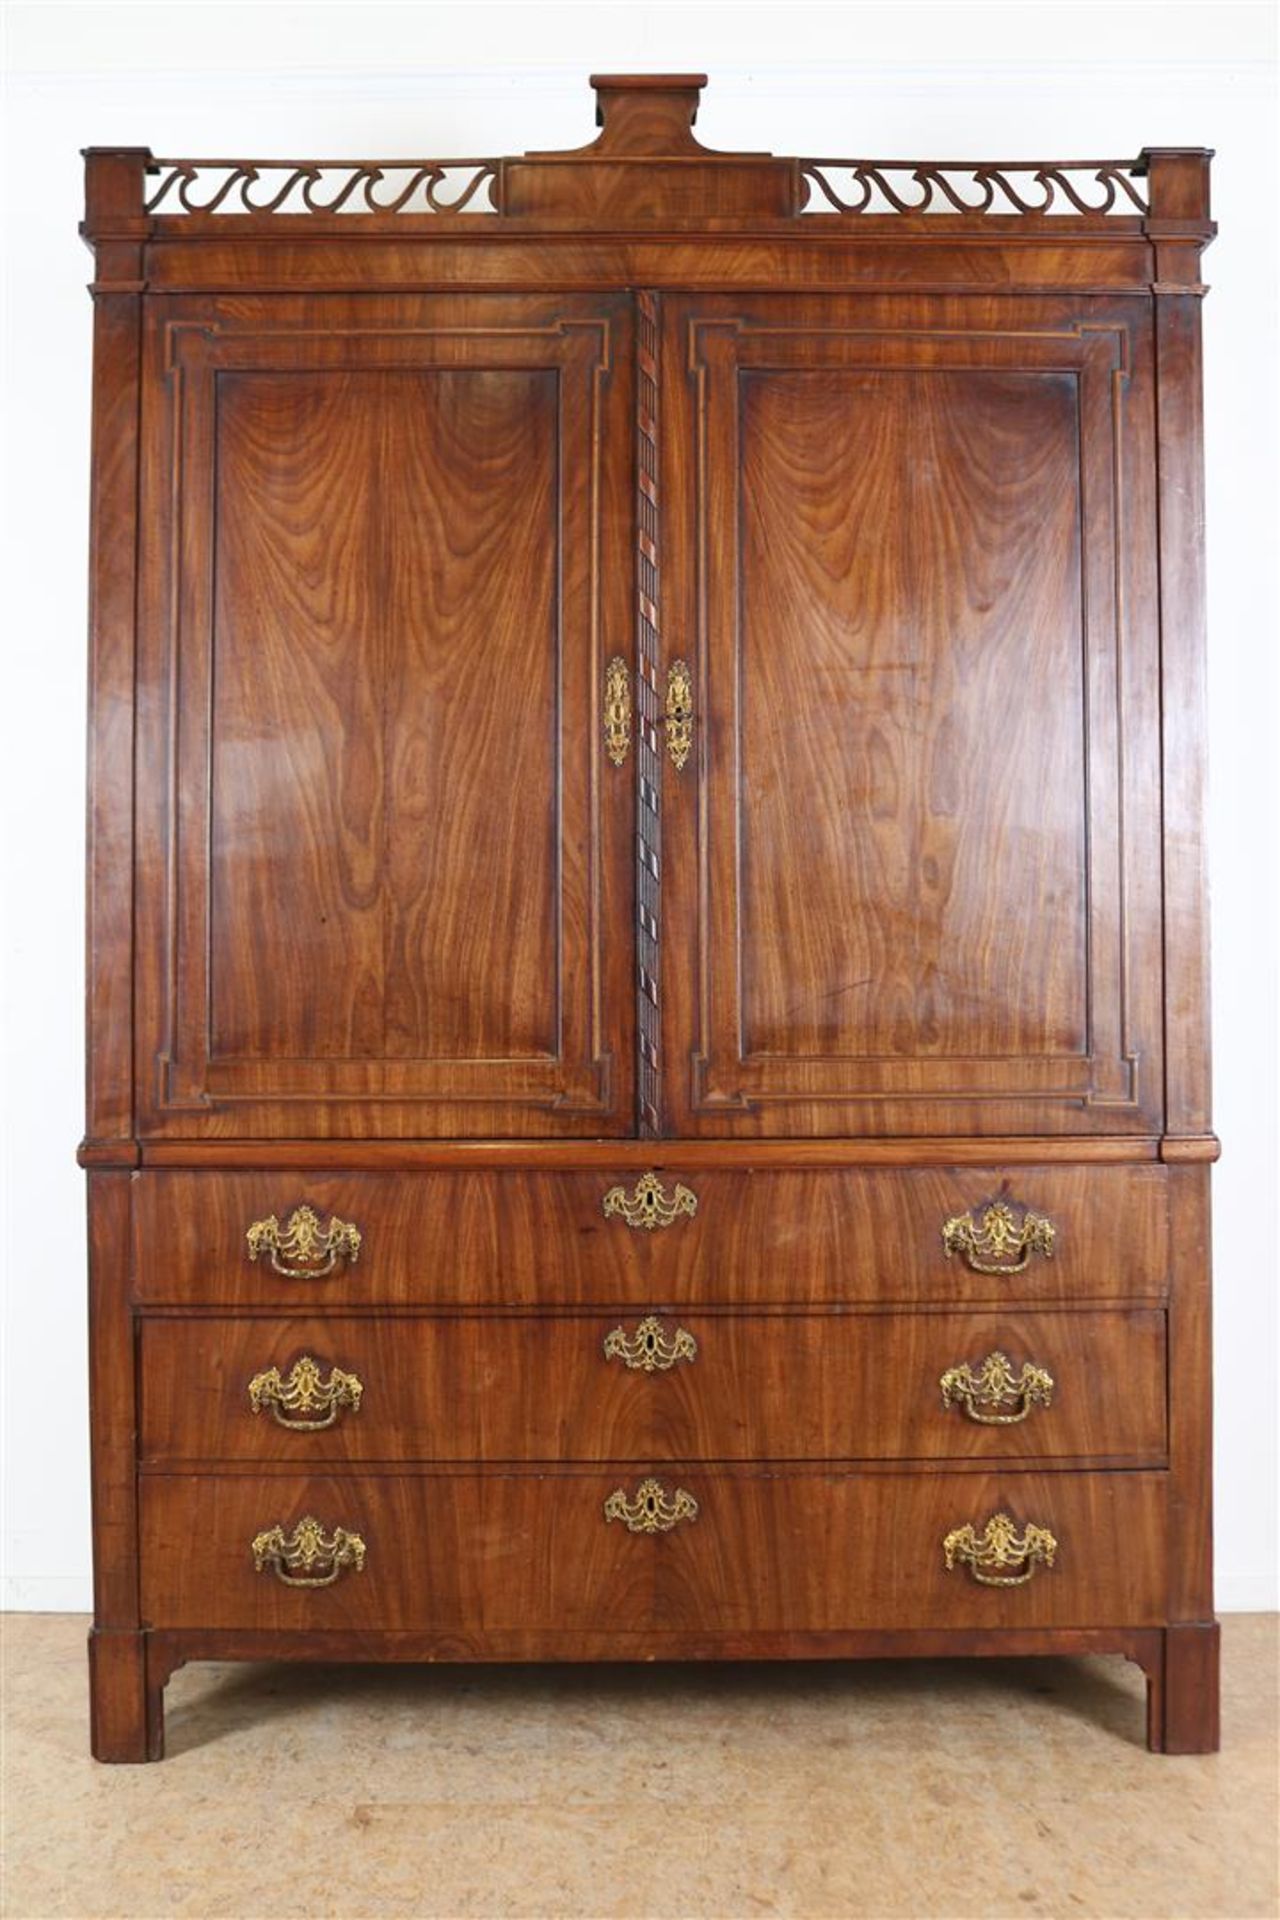 Mahogny cabinet, about 1810